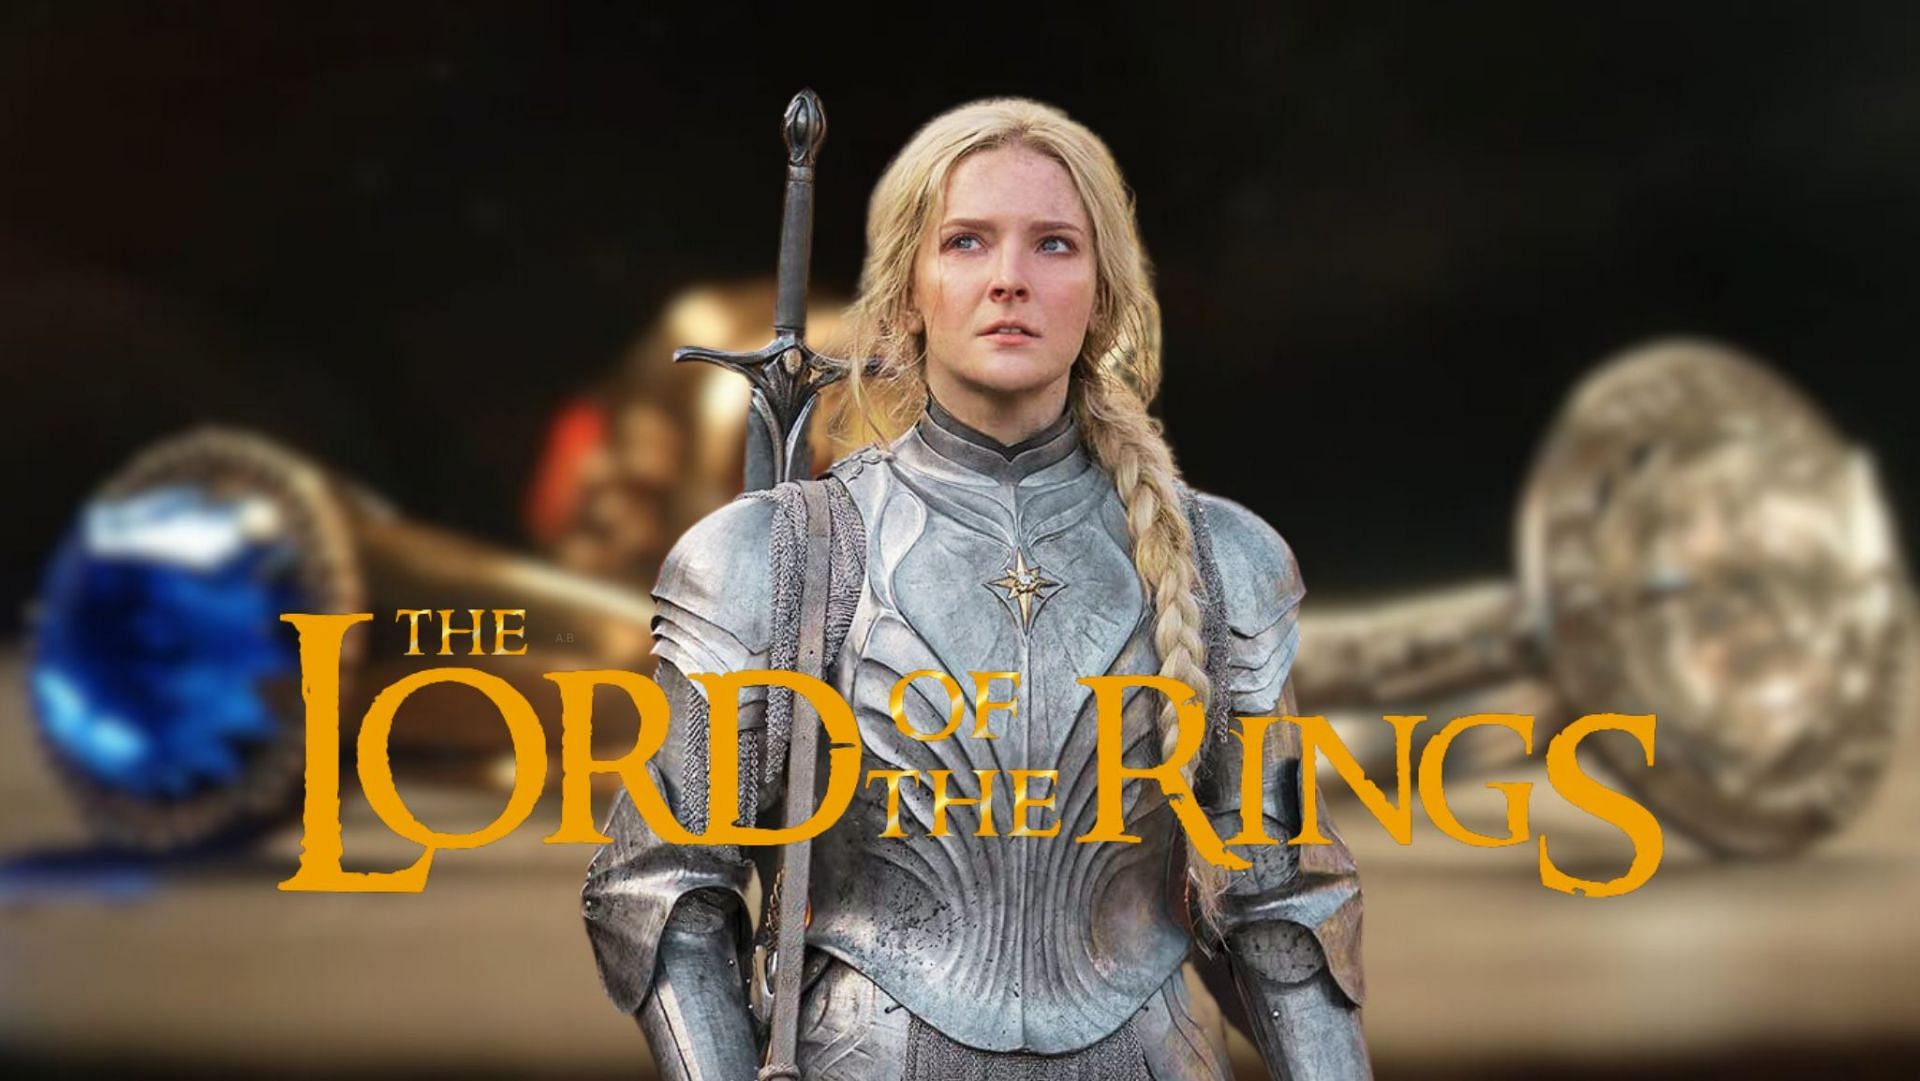 The Lord of the Rings: The Return of the King in Concert | Royal Albert Hall